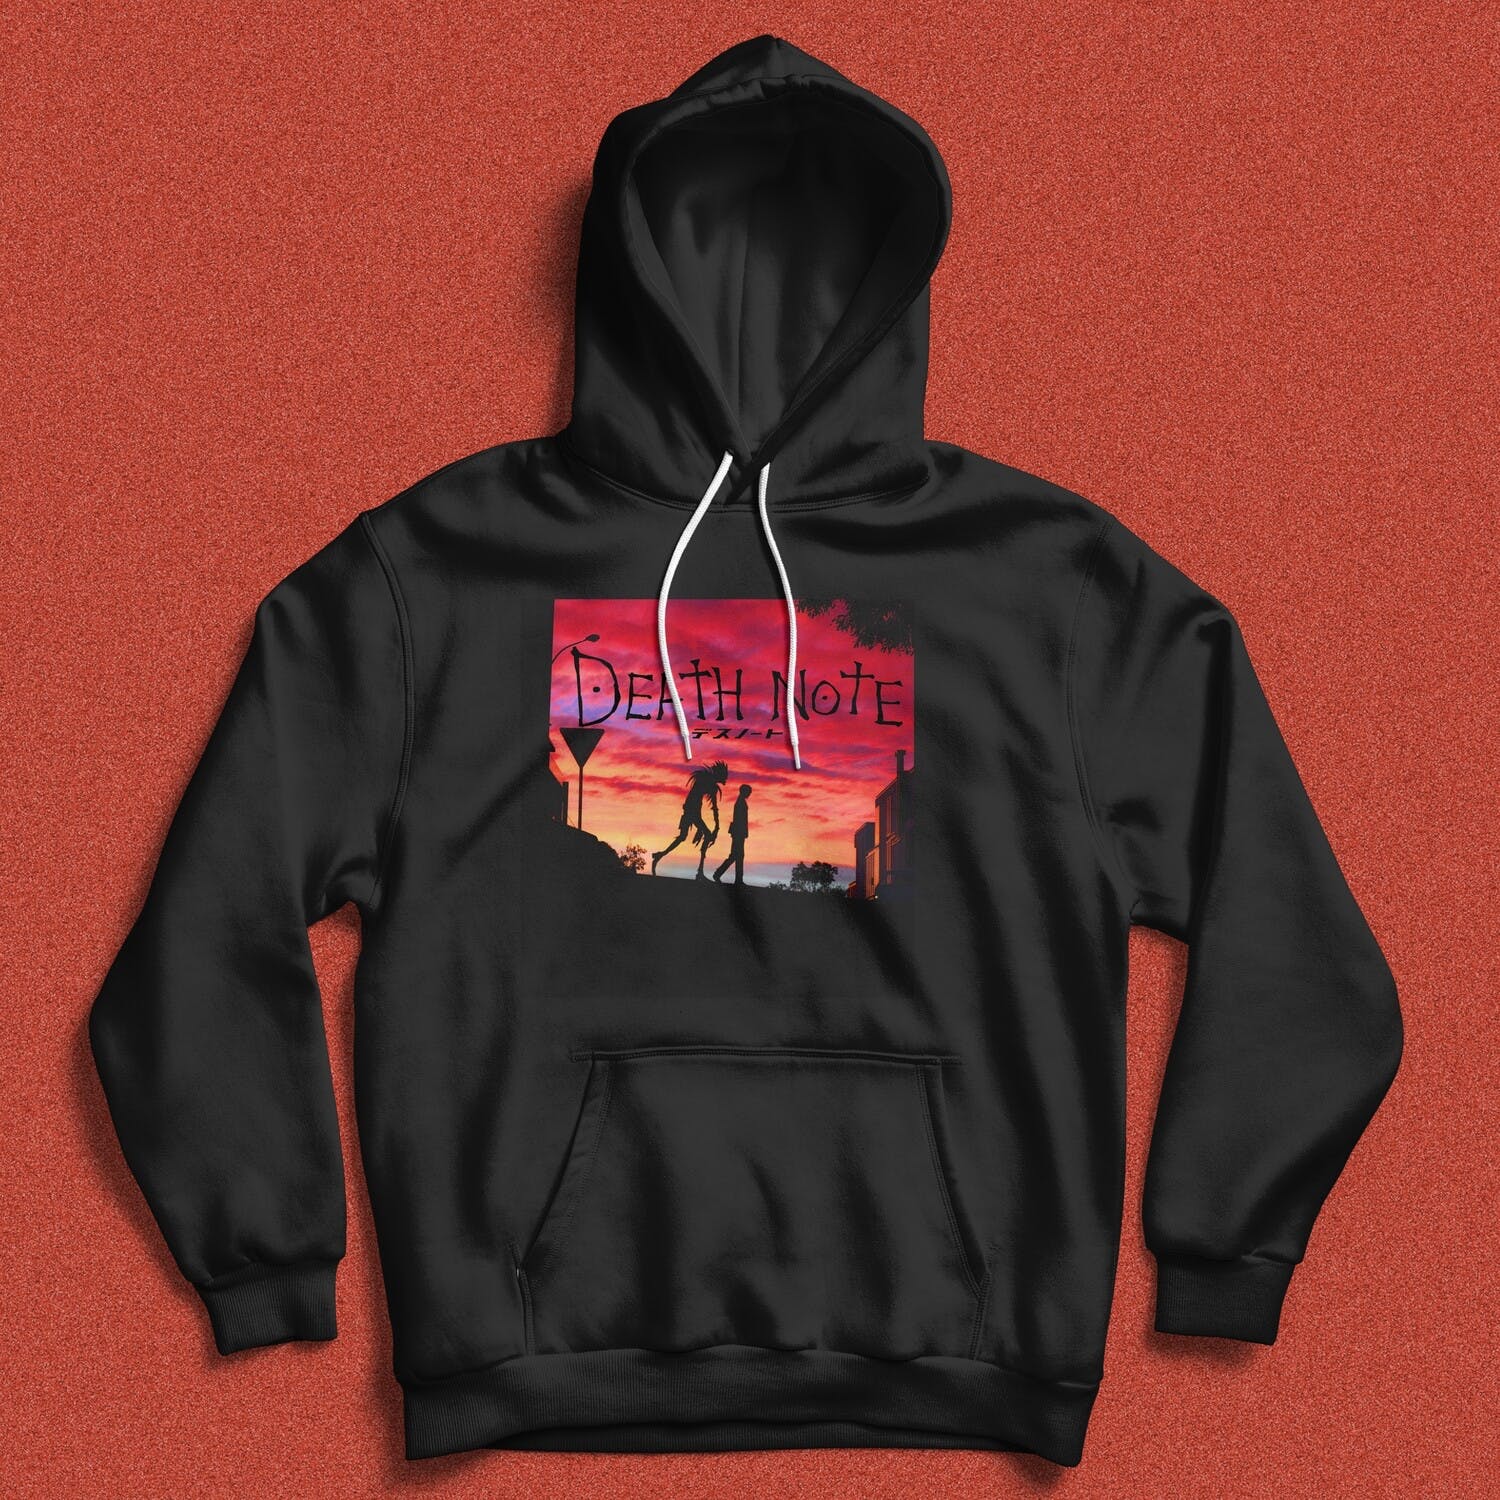 Product,Sleeve,Text,Red,Textile,Outerwear,Sweatshirt,Hoodie,Font,Orange